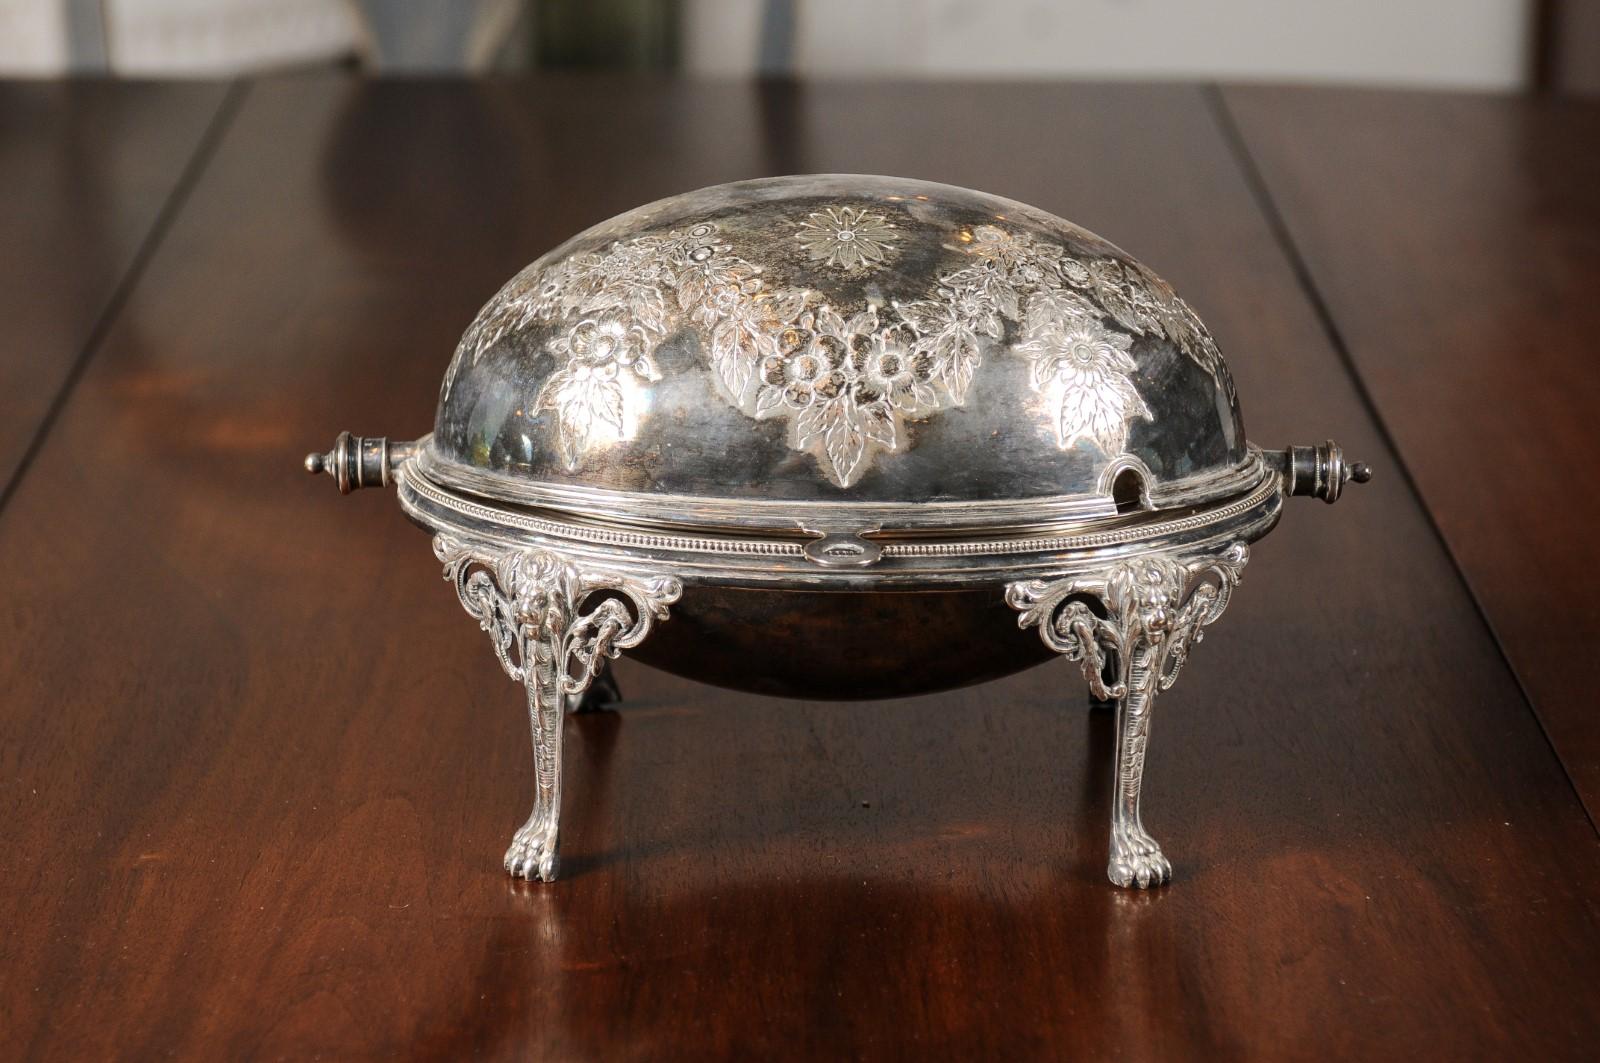 An English silver plated asparagus dish warmer from the 19th century, with floral motifs and cabriole legs. Born in England during the 19th century, this asparagus dish warmer features an oval top, adorned with a delicate floral décor. The lid